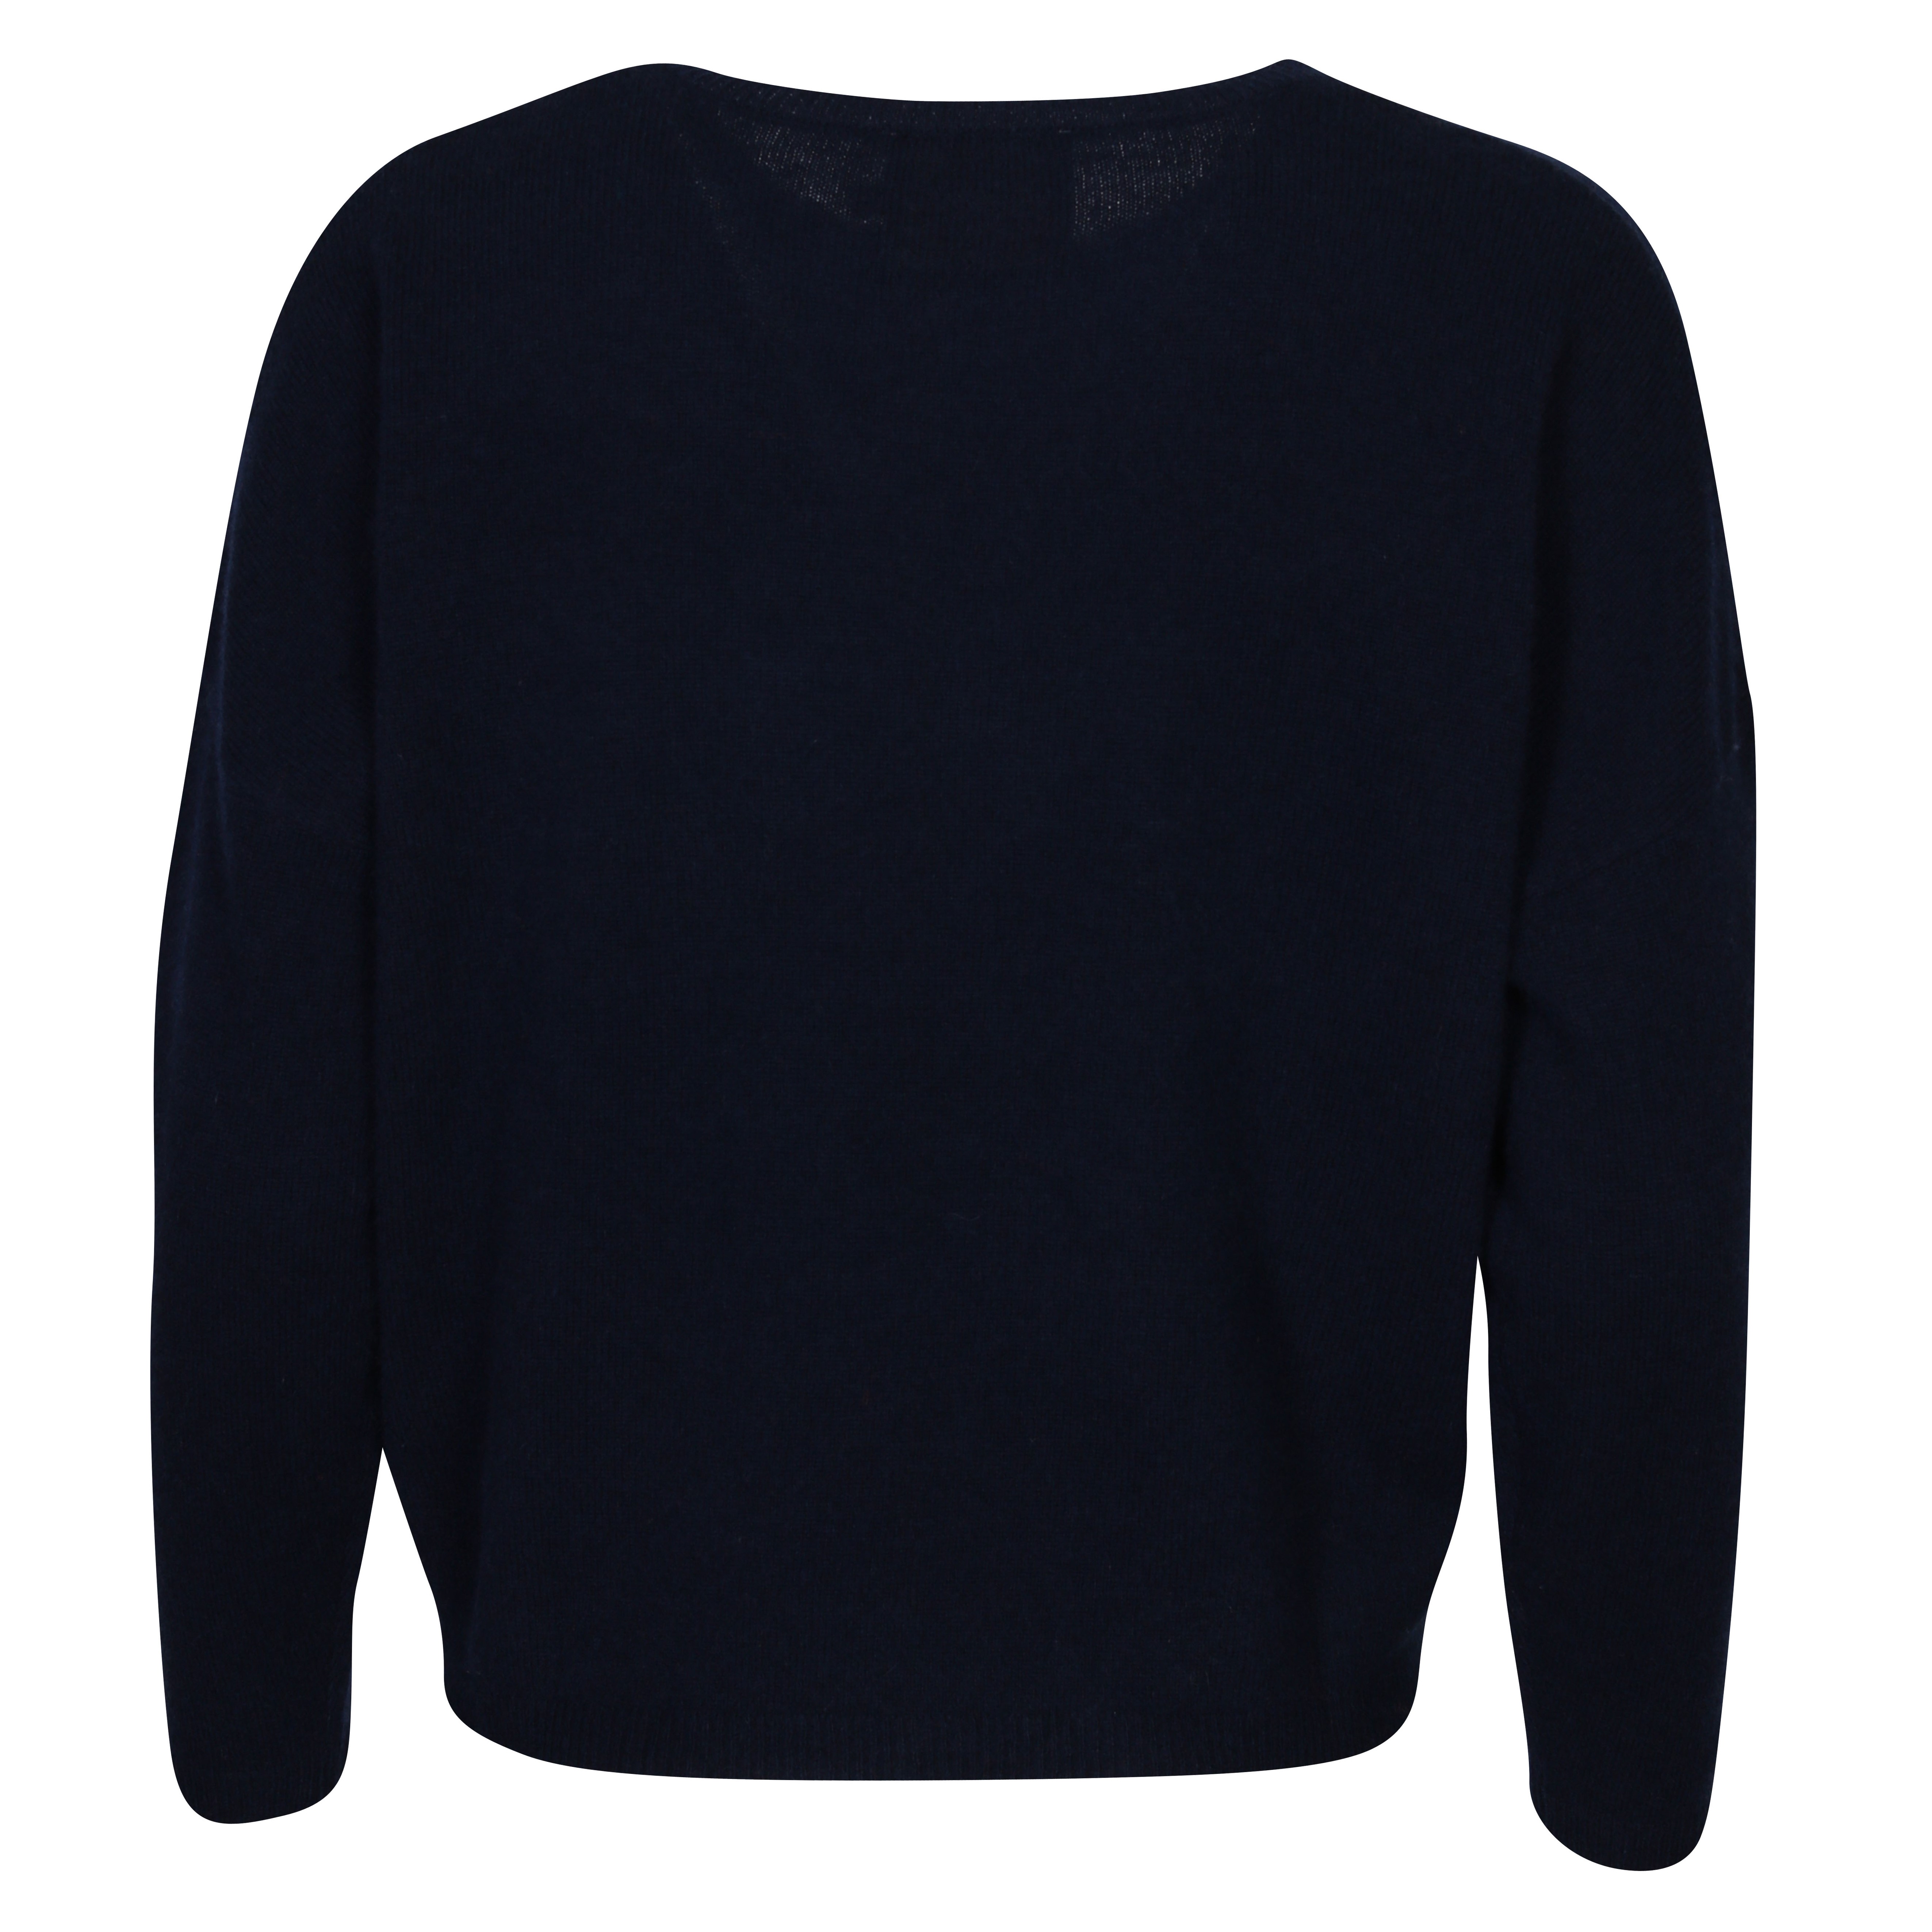 Absolut Cashmere Kaira Cashmere Pullover in Nuit M